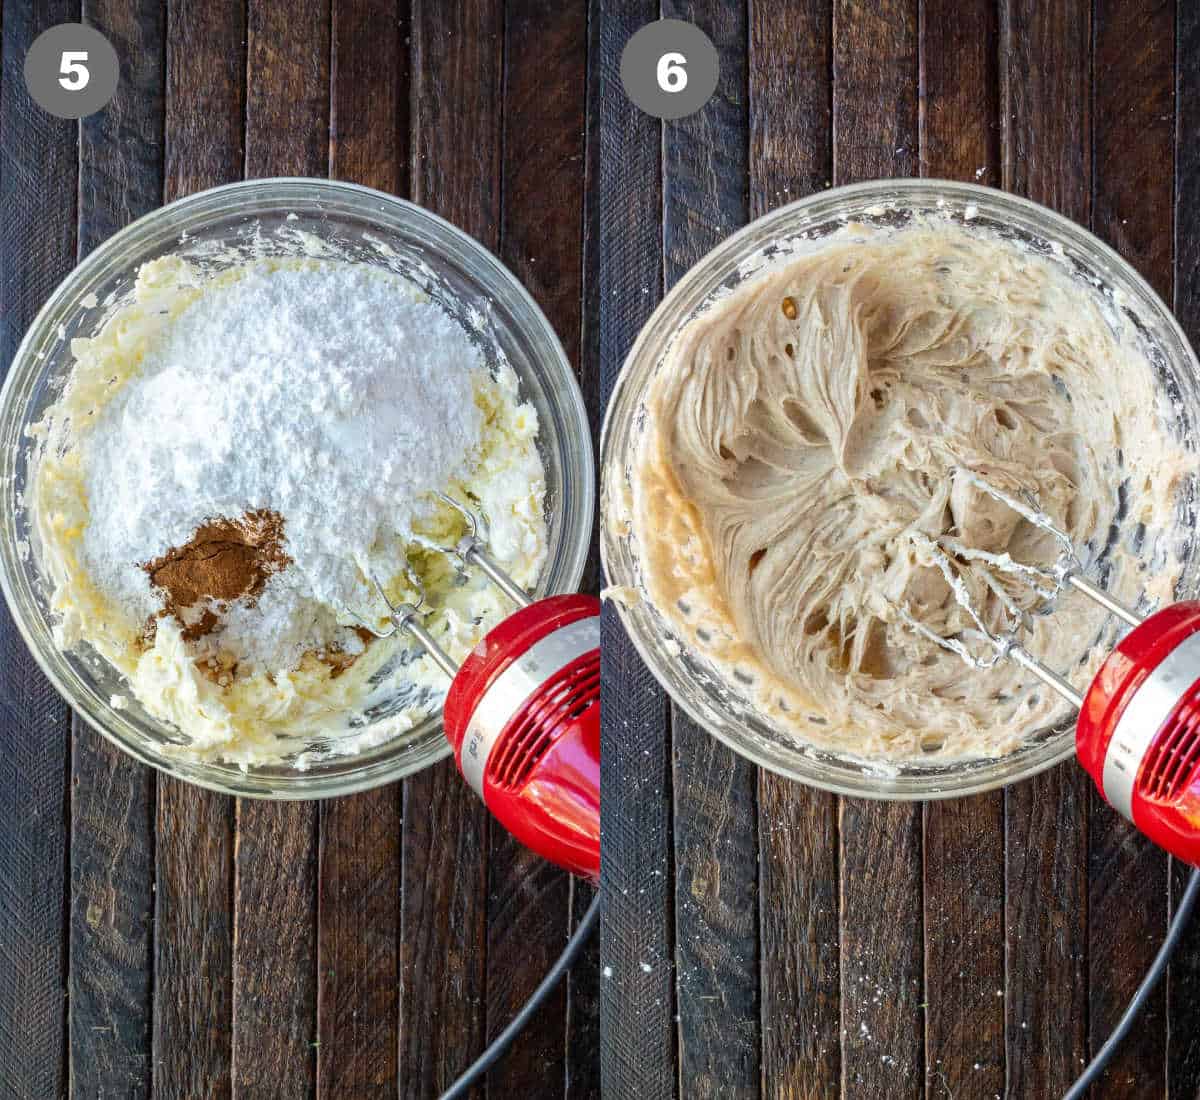 All the frosting ingredients mixed together in a bowl.